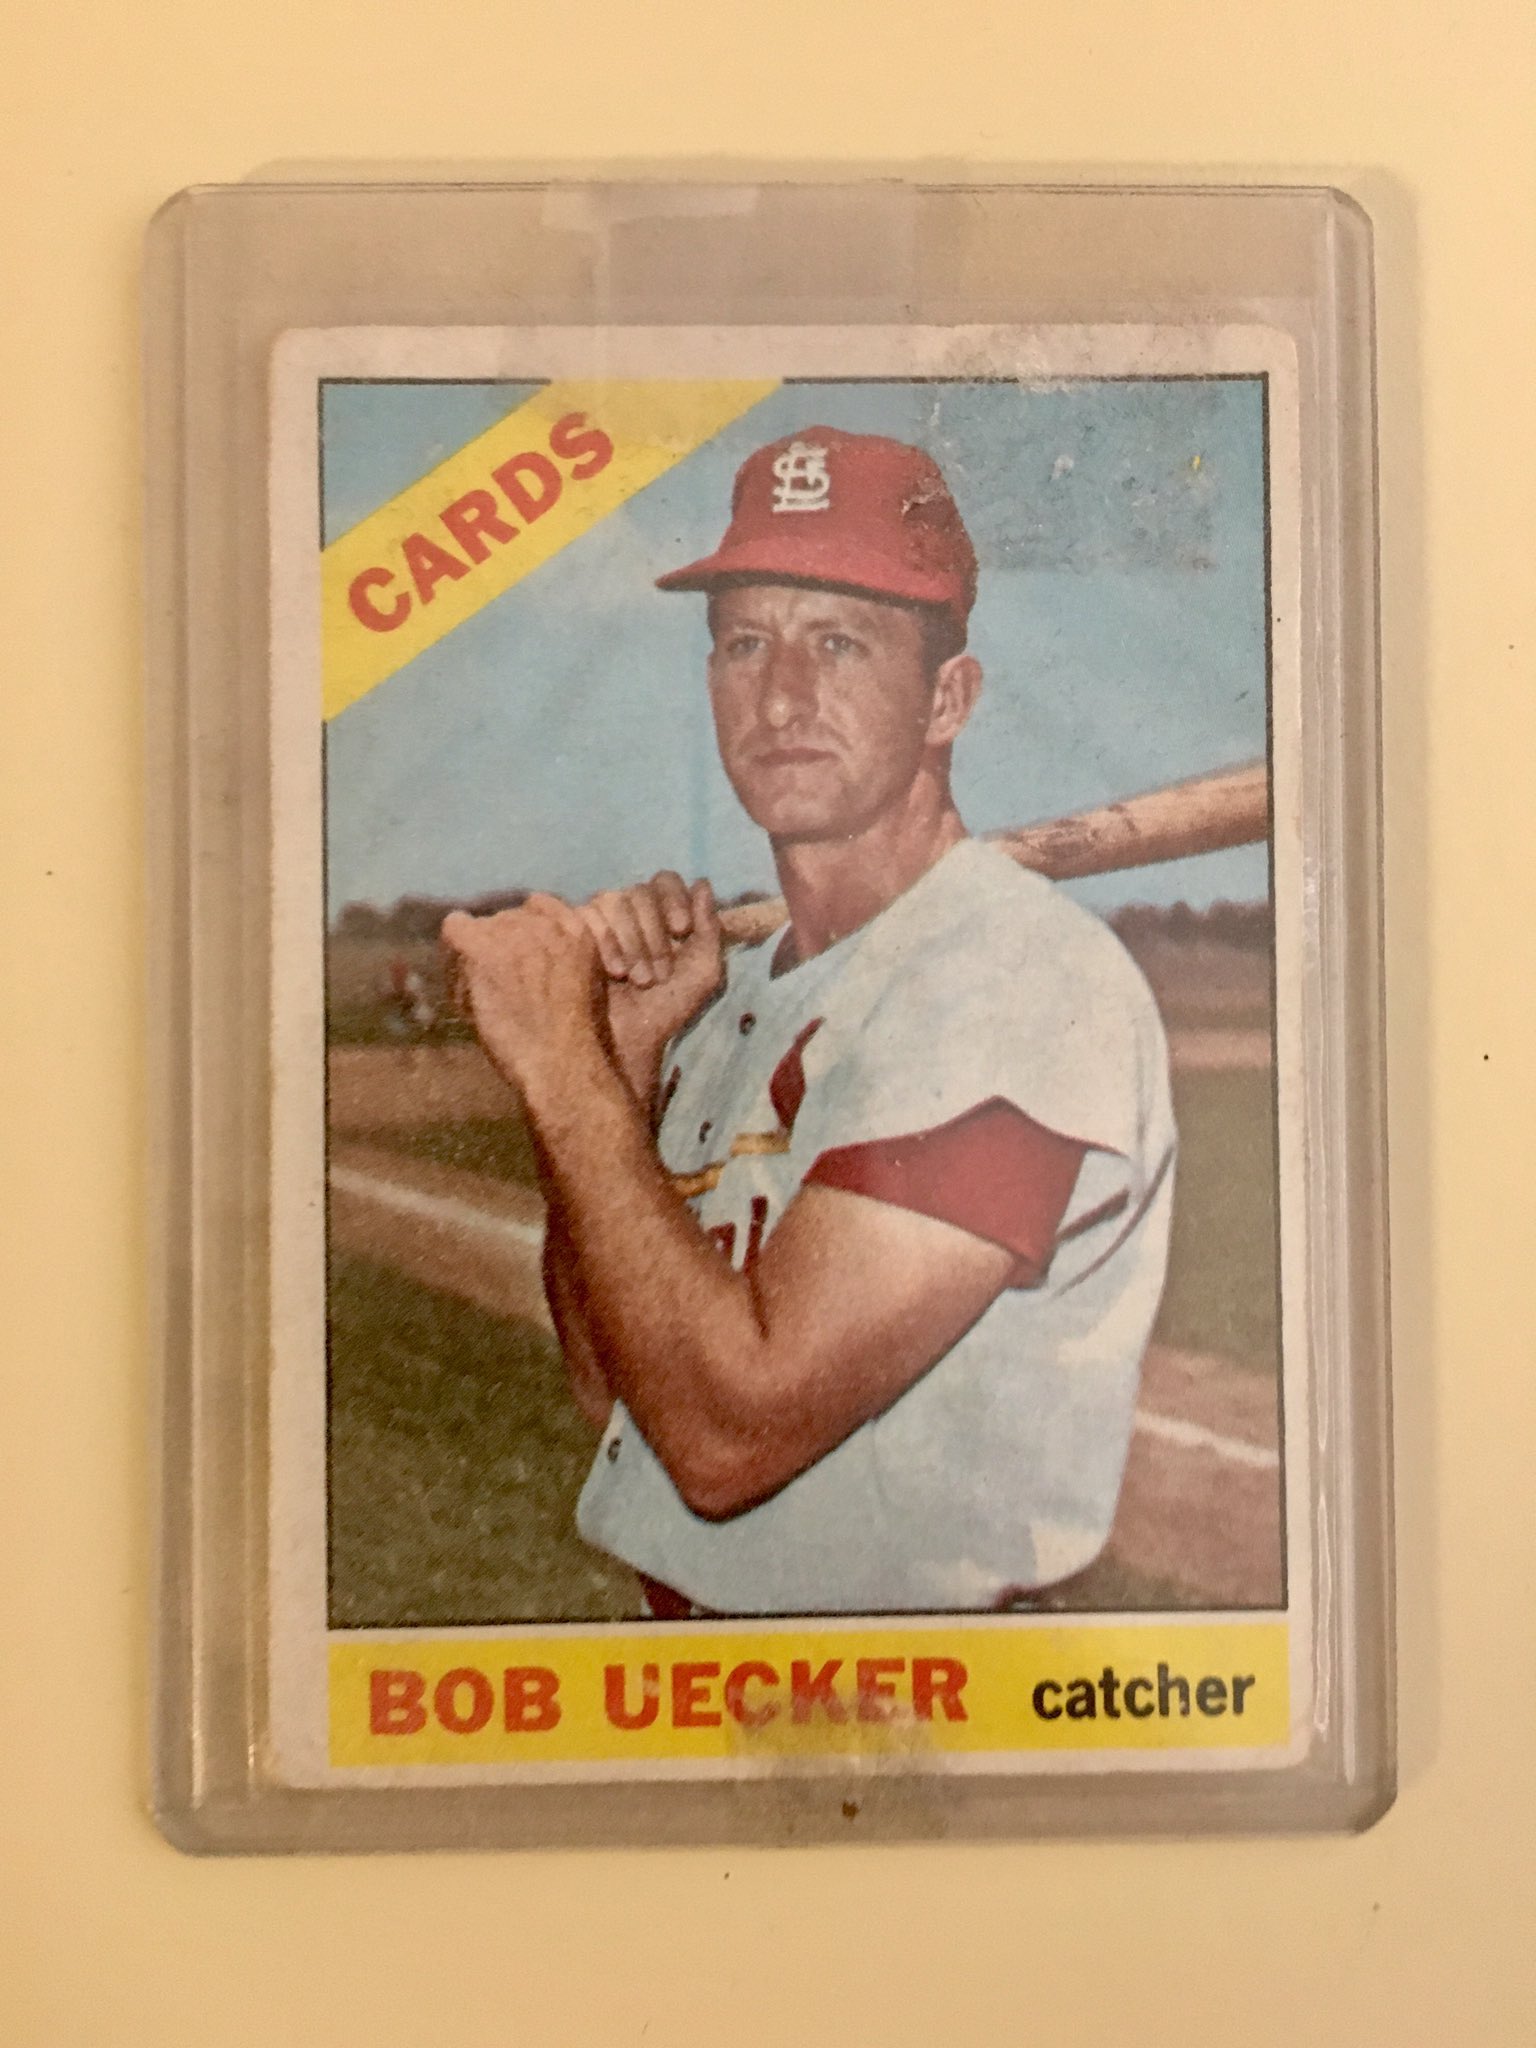 Happy birthday to the legend
Bob Uecker!

his is also one of my favorite random baseball cards I own 